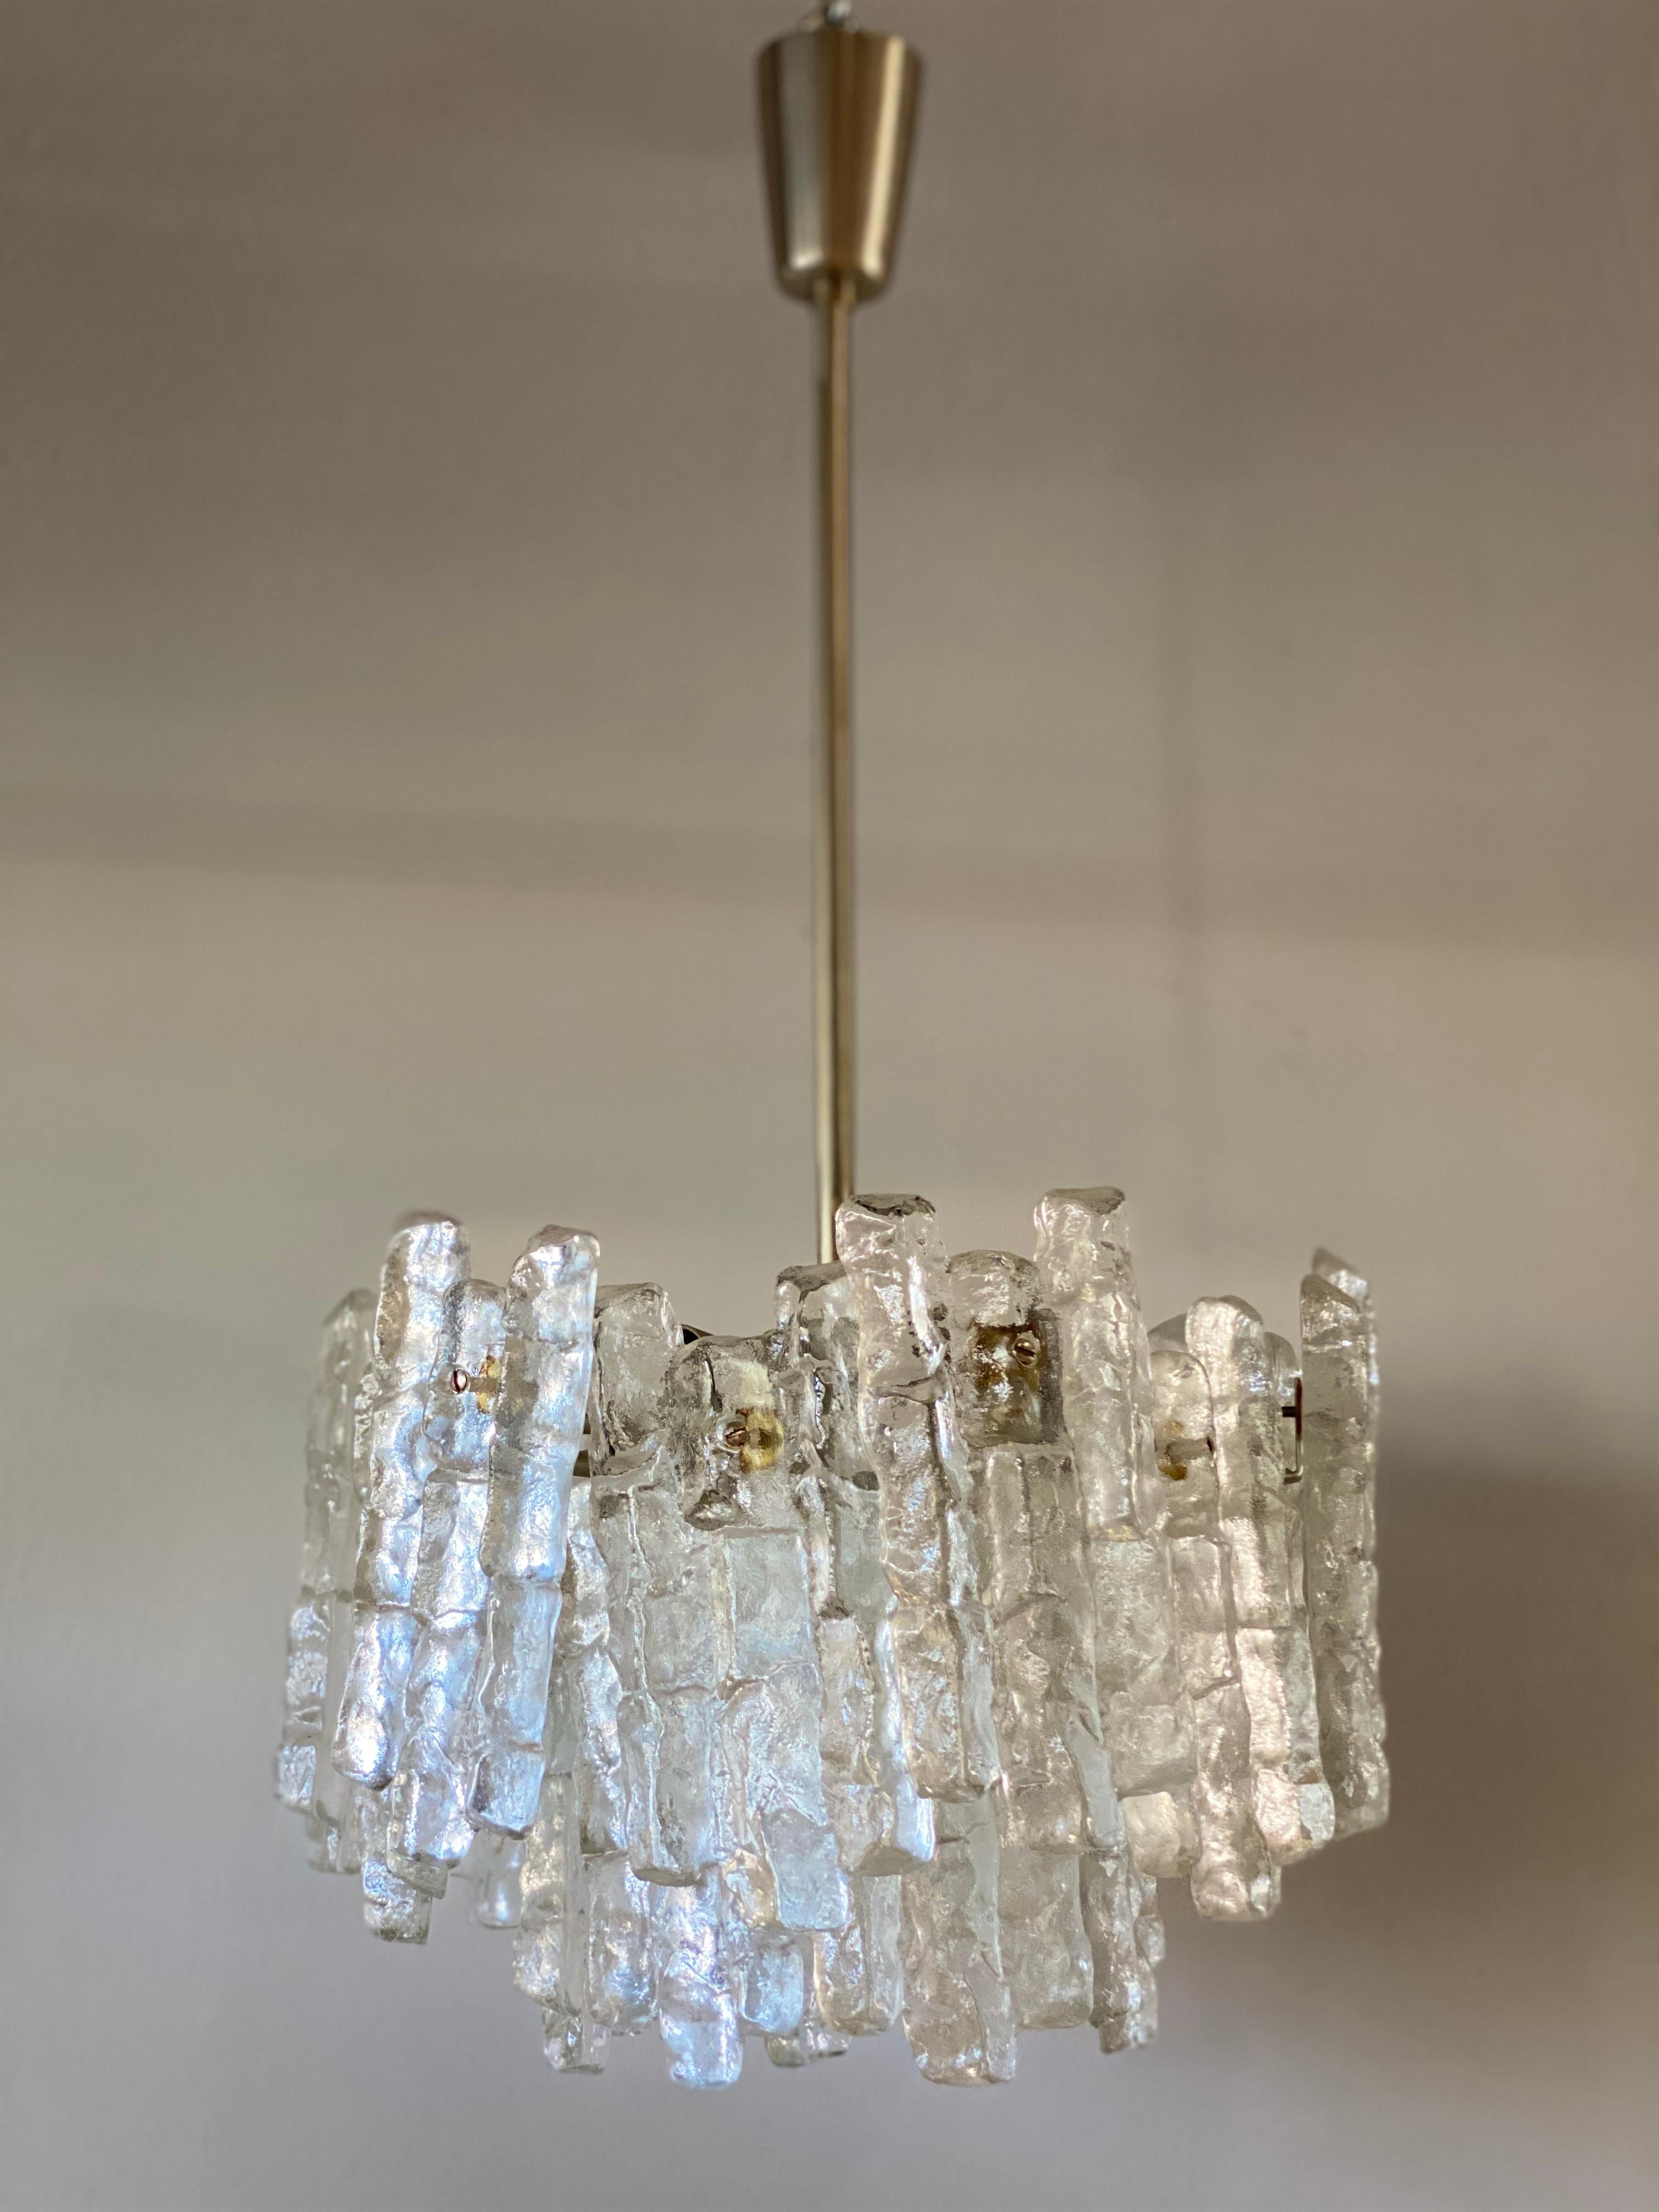 J.T. Kalmar 'Ice Glass' Chandelier, 1960s. Middel size with six lamp sockets
This chandelier from the 1960s by the Austrian designer J.T. Kalmar apparently more than deserves the name Ice Glass. The glass icicles lined up together form the